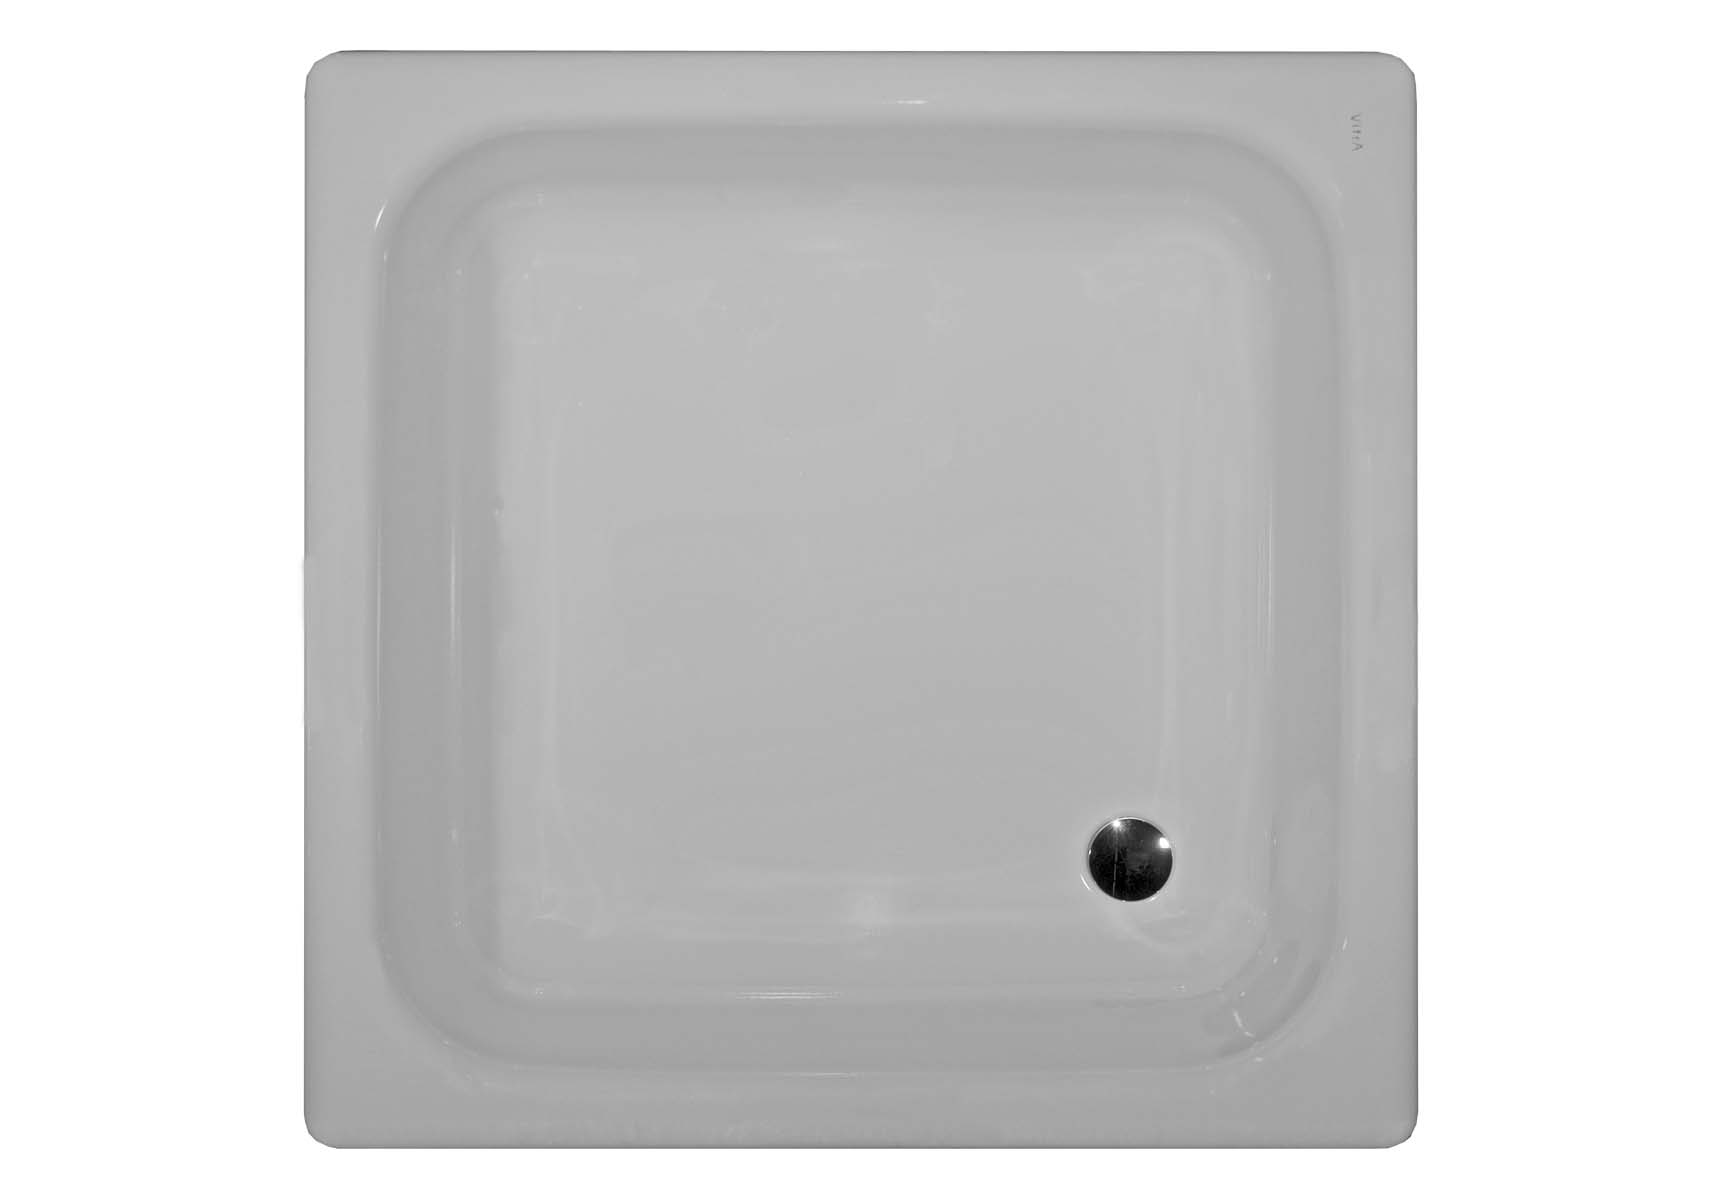 Generic Square 80x80 cm Steel Shower Tray, 3.5 Mm, H:16 cm, 52 Mm Waste